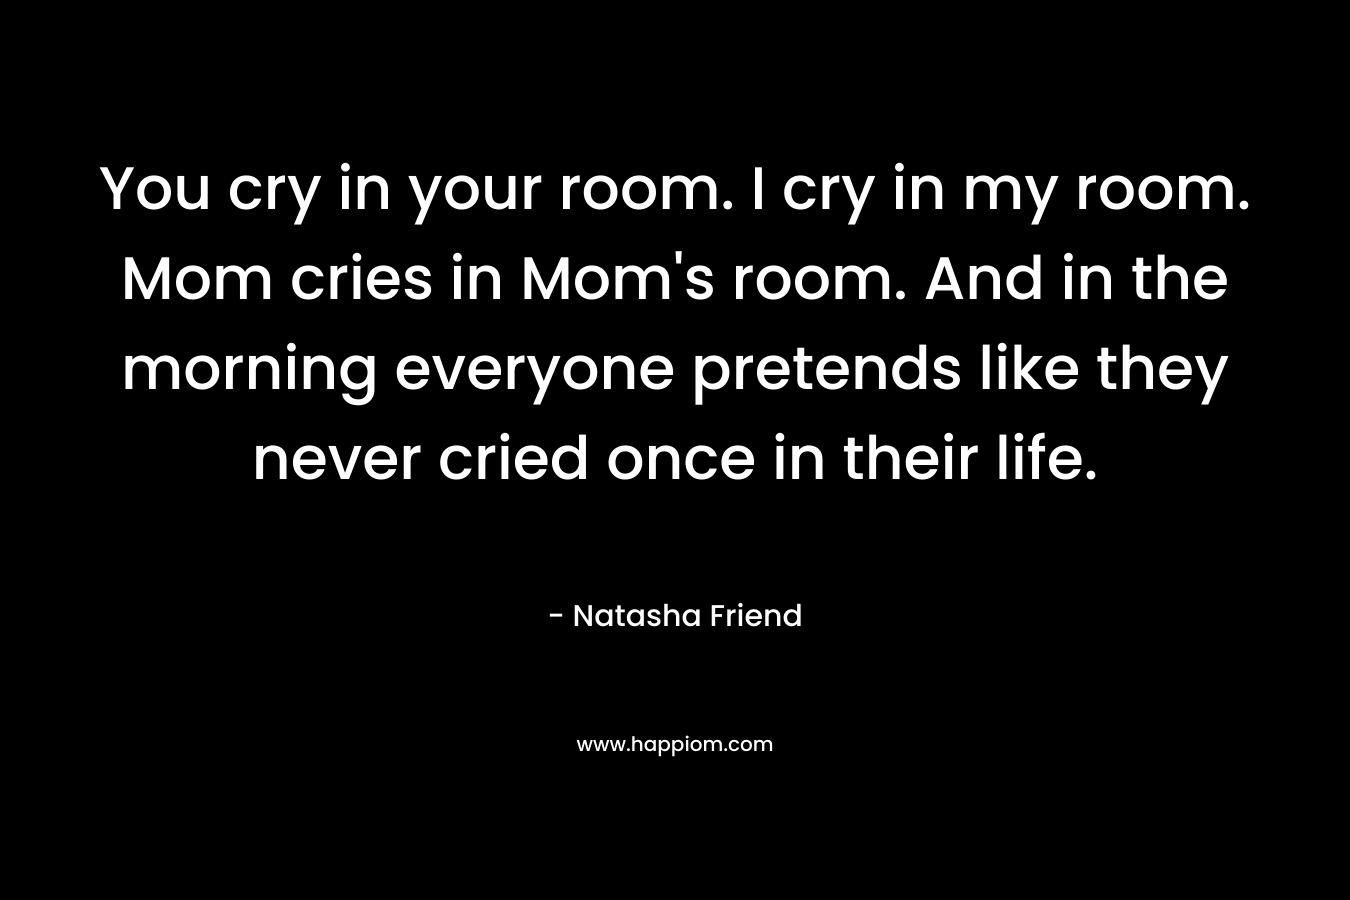 You cry in your room. I cry in my room. Mom cries in Mom’s room. And in the morning everyone pretends like they never cried once in their life. – Natasha Friend